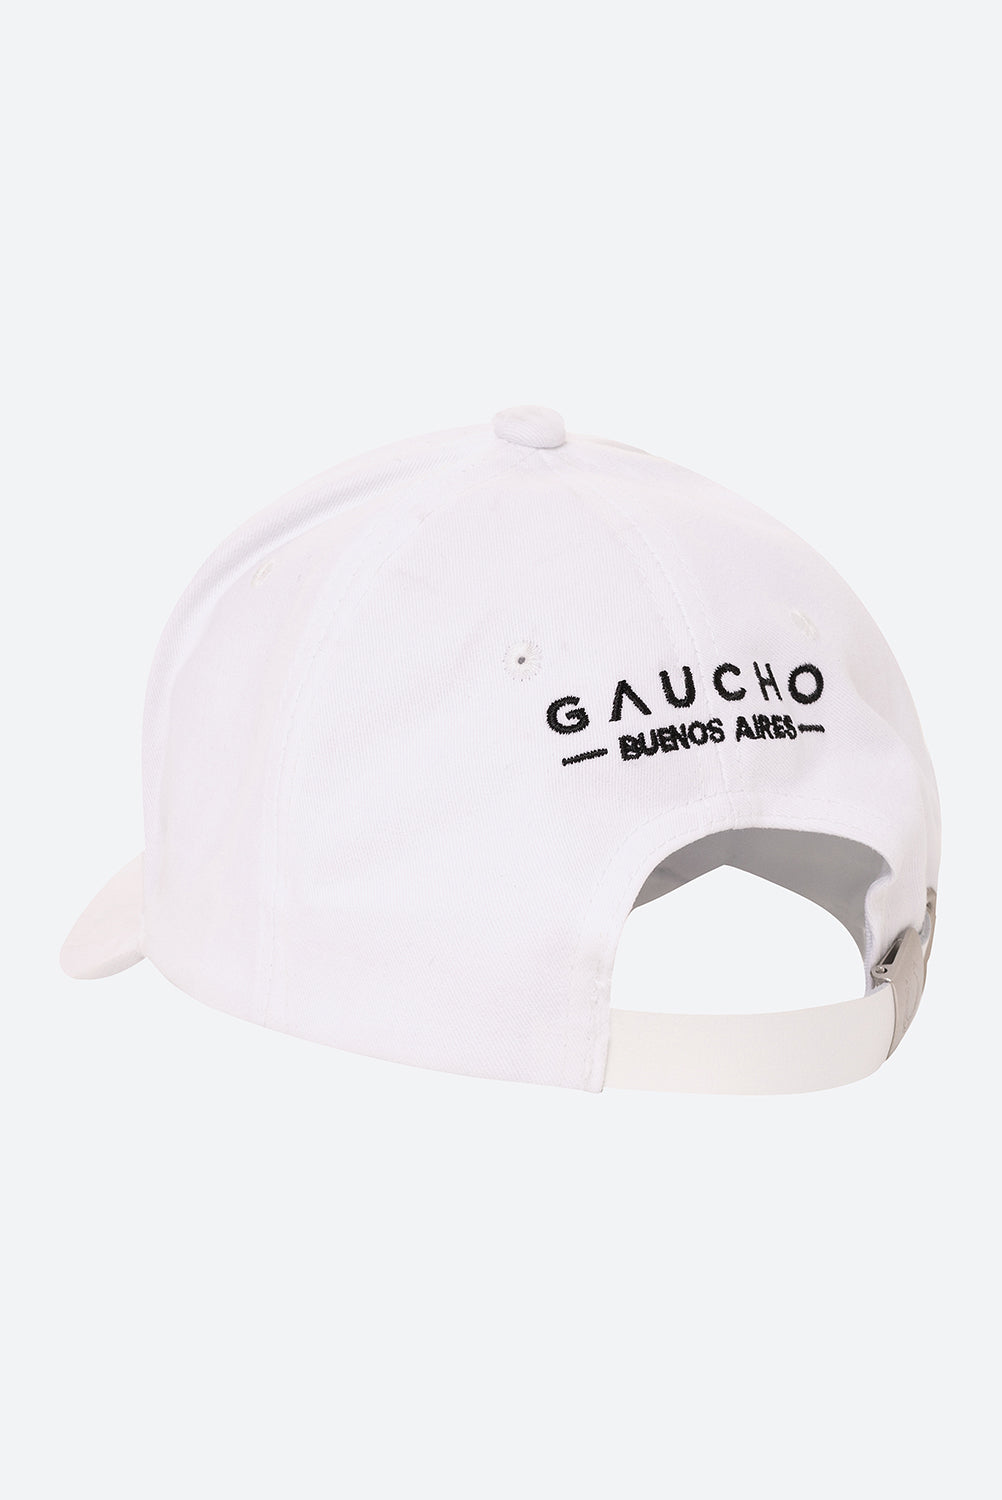 Women's Maison Gaucho Cap in White with Black Embroidery